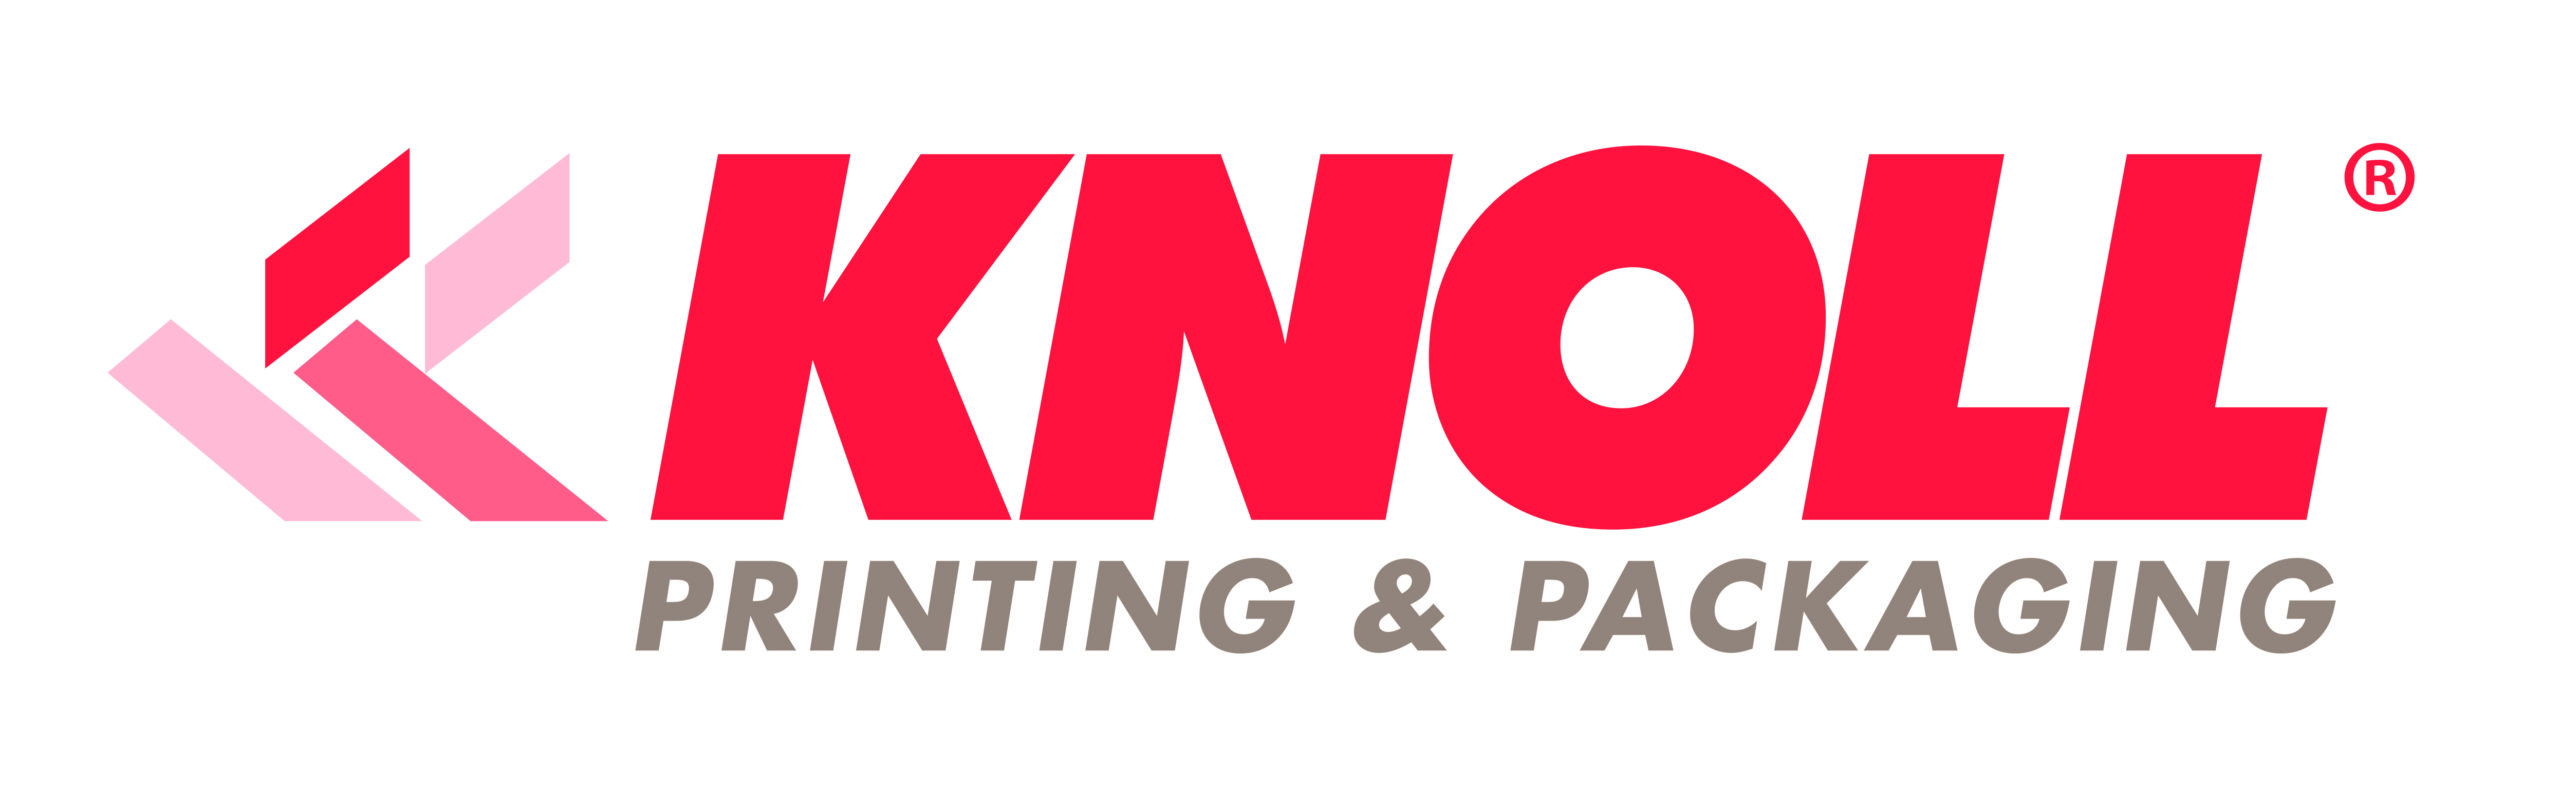 Linked logo for Knoll Printing & Packaging